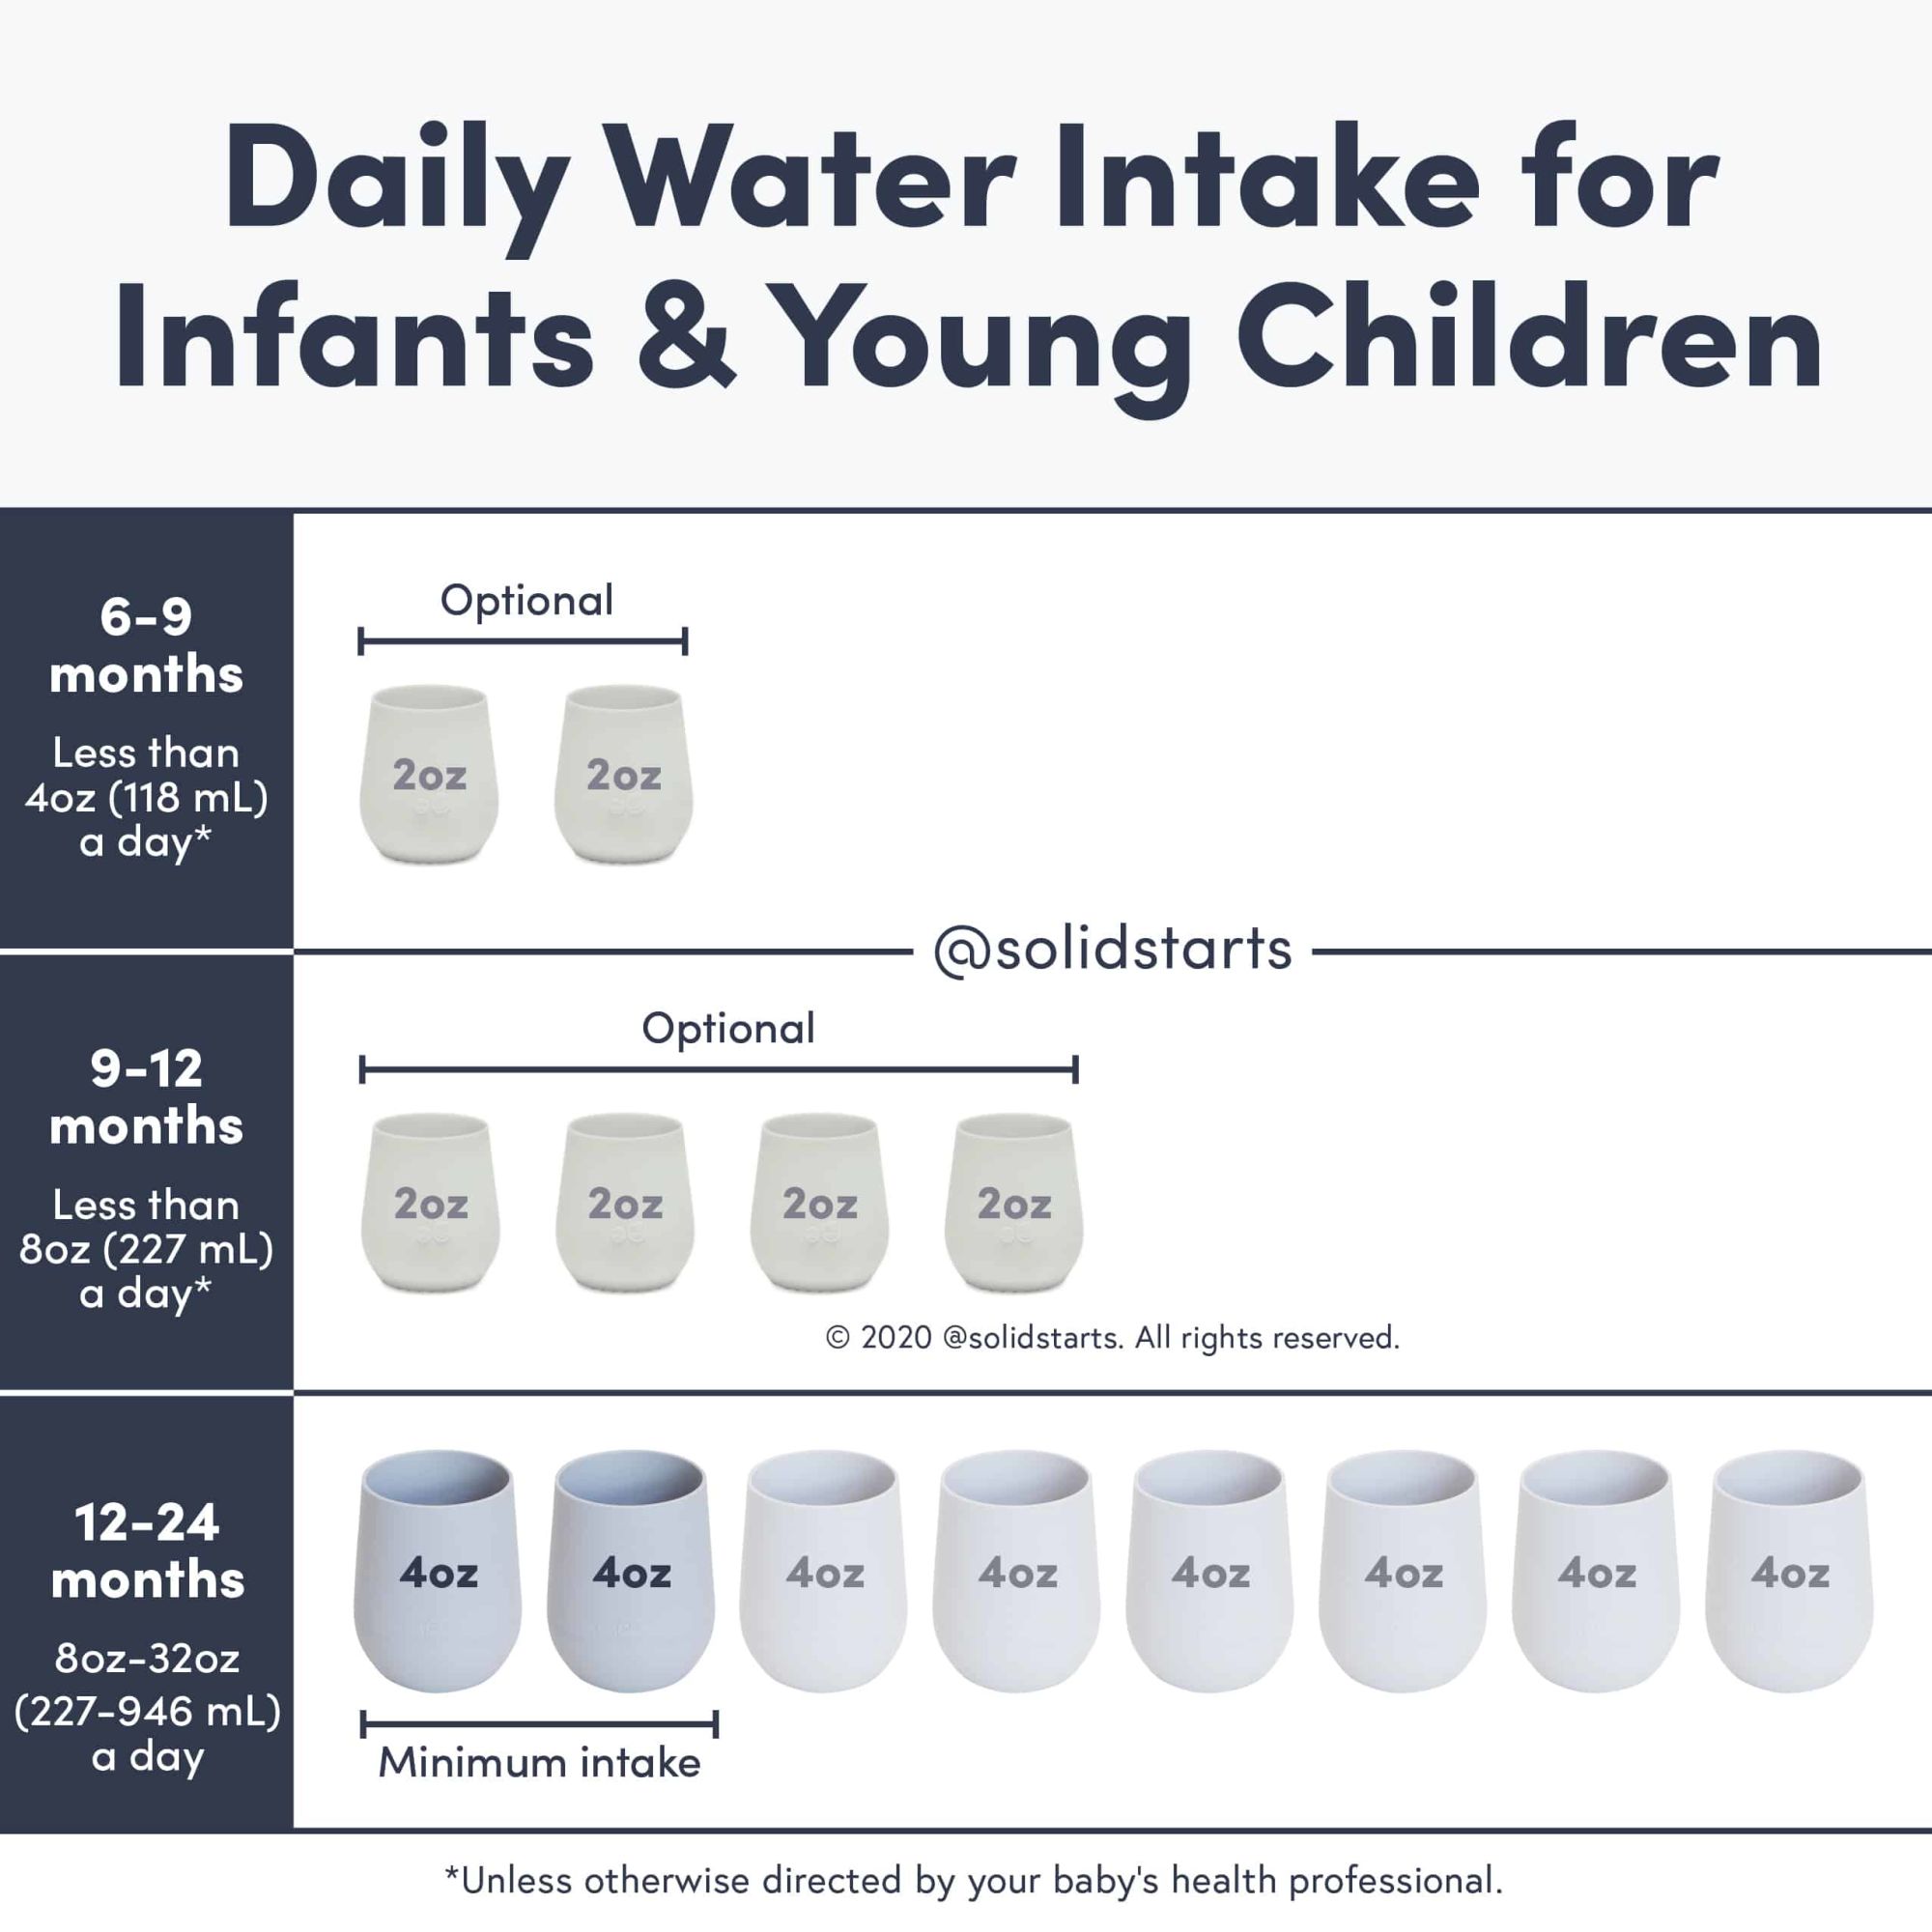 When is it safe to give my baby water?